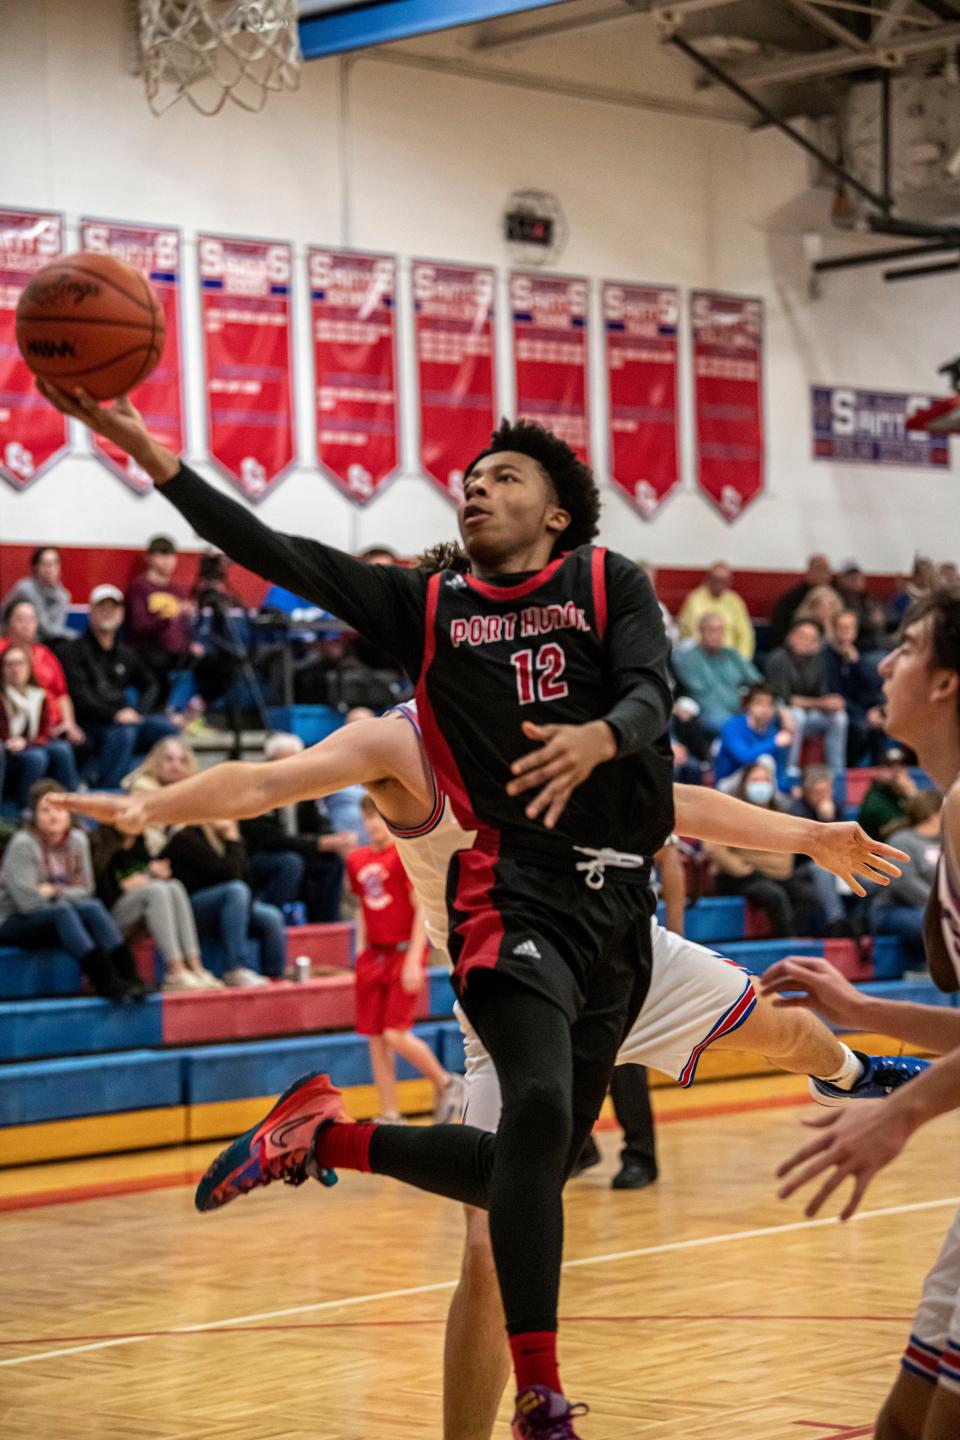 Port Huron’s Deonte Foy goes for a layup during a game last season. He finished with seven points in the Big Reds' 53-42 loss to Utica on Wednesday